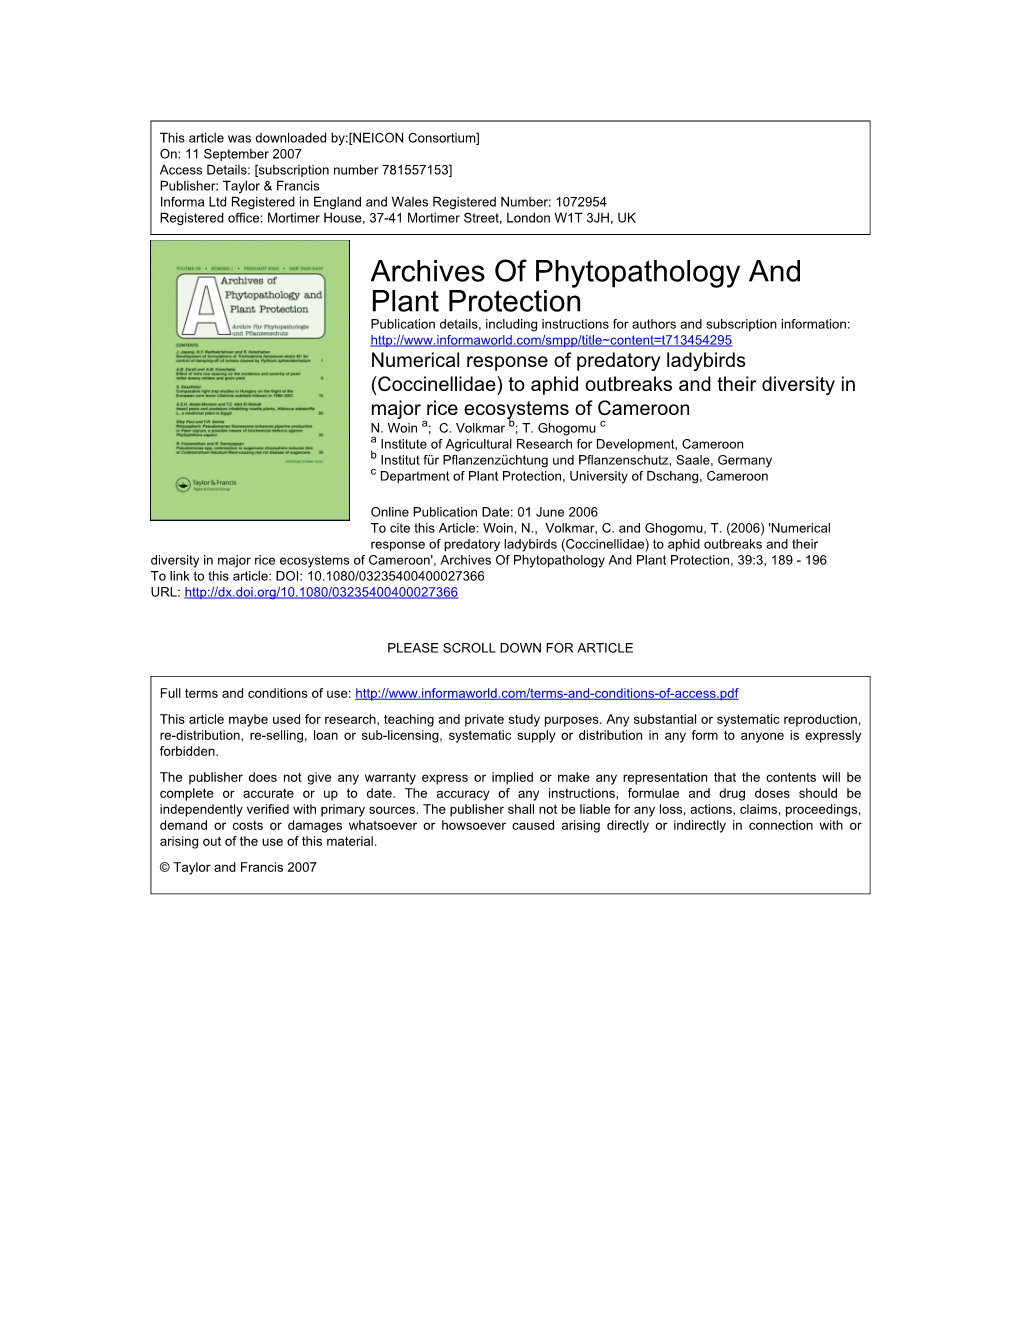 Archives of Phytopathology and Plant Protection